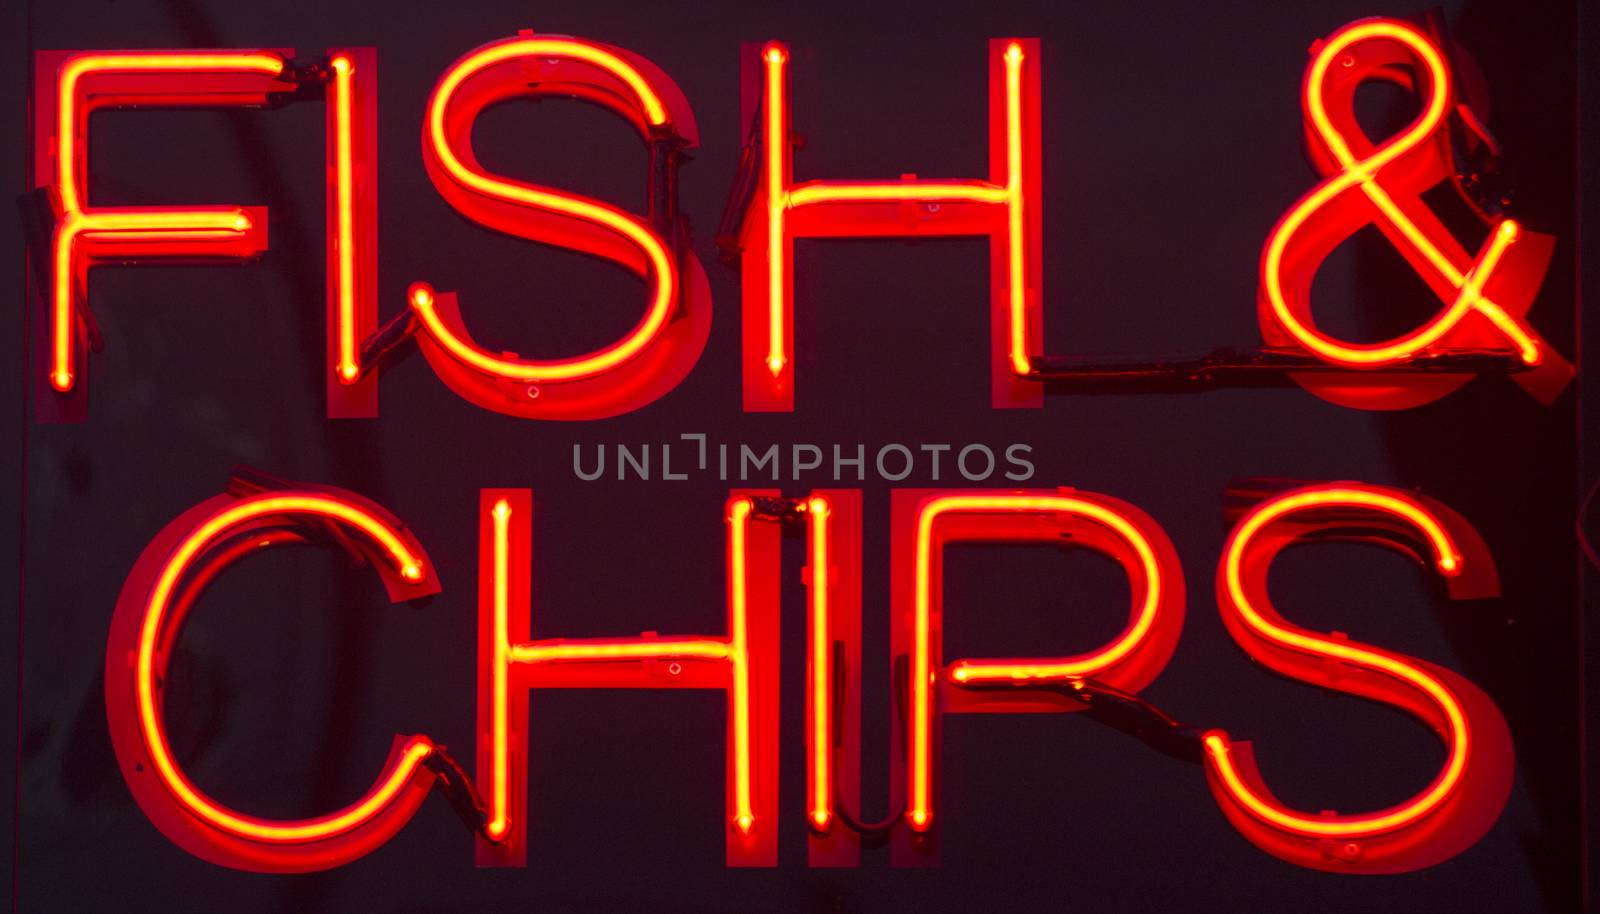 Fish and chips restaurant neon sign by edwardolive